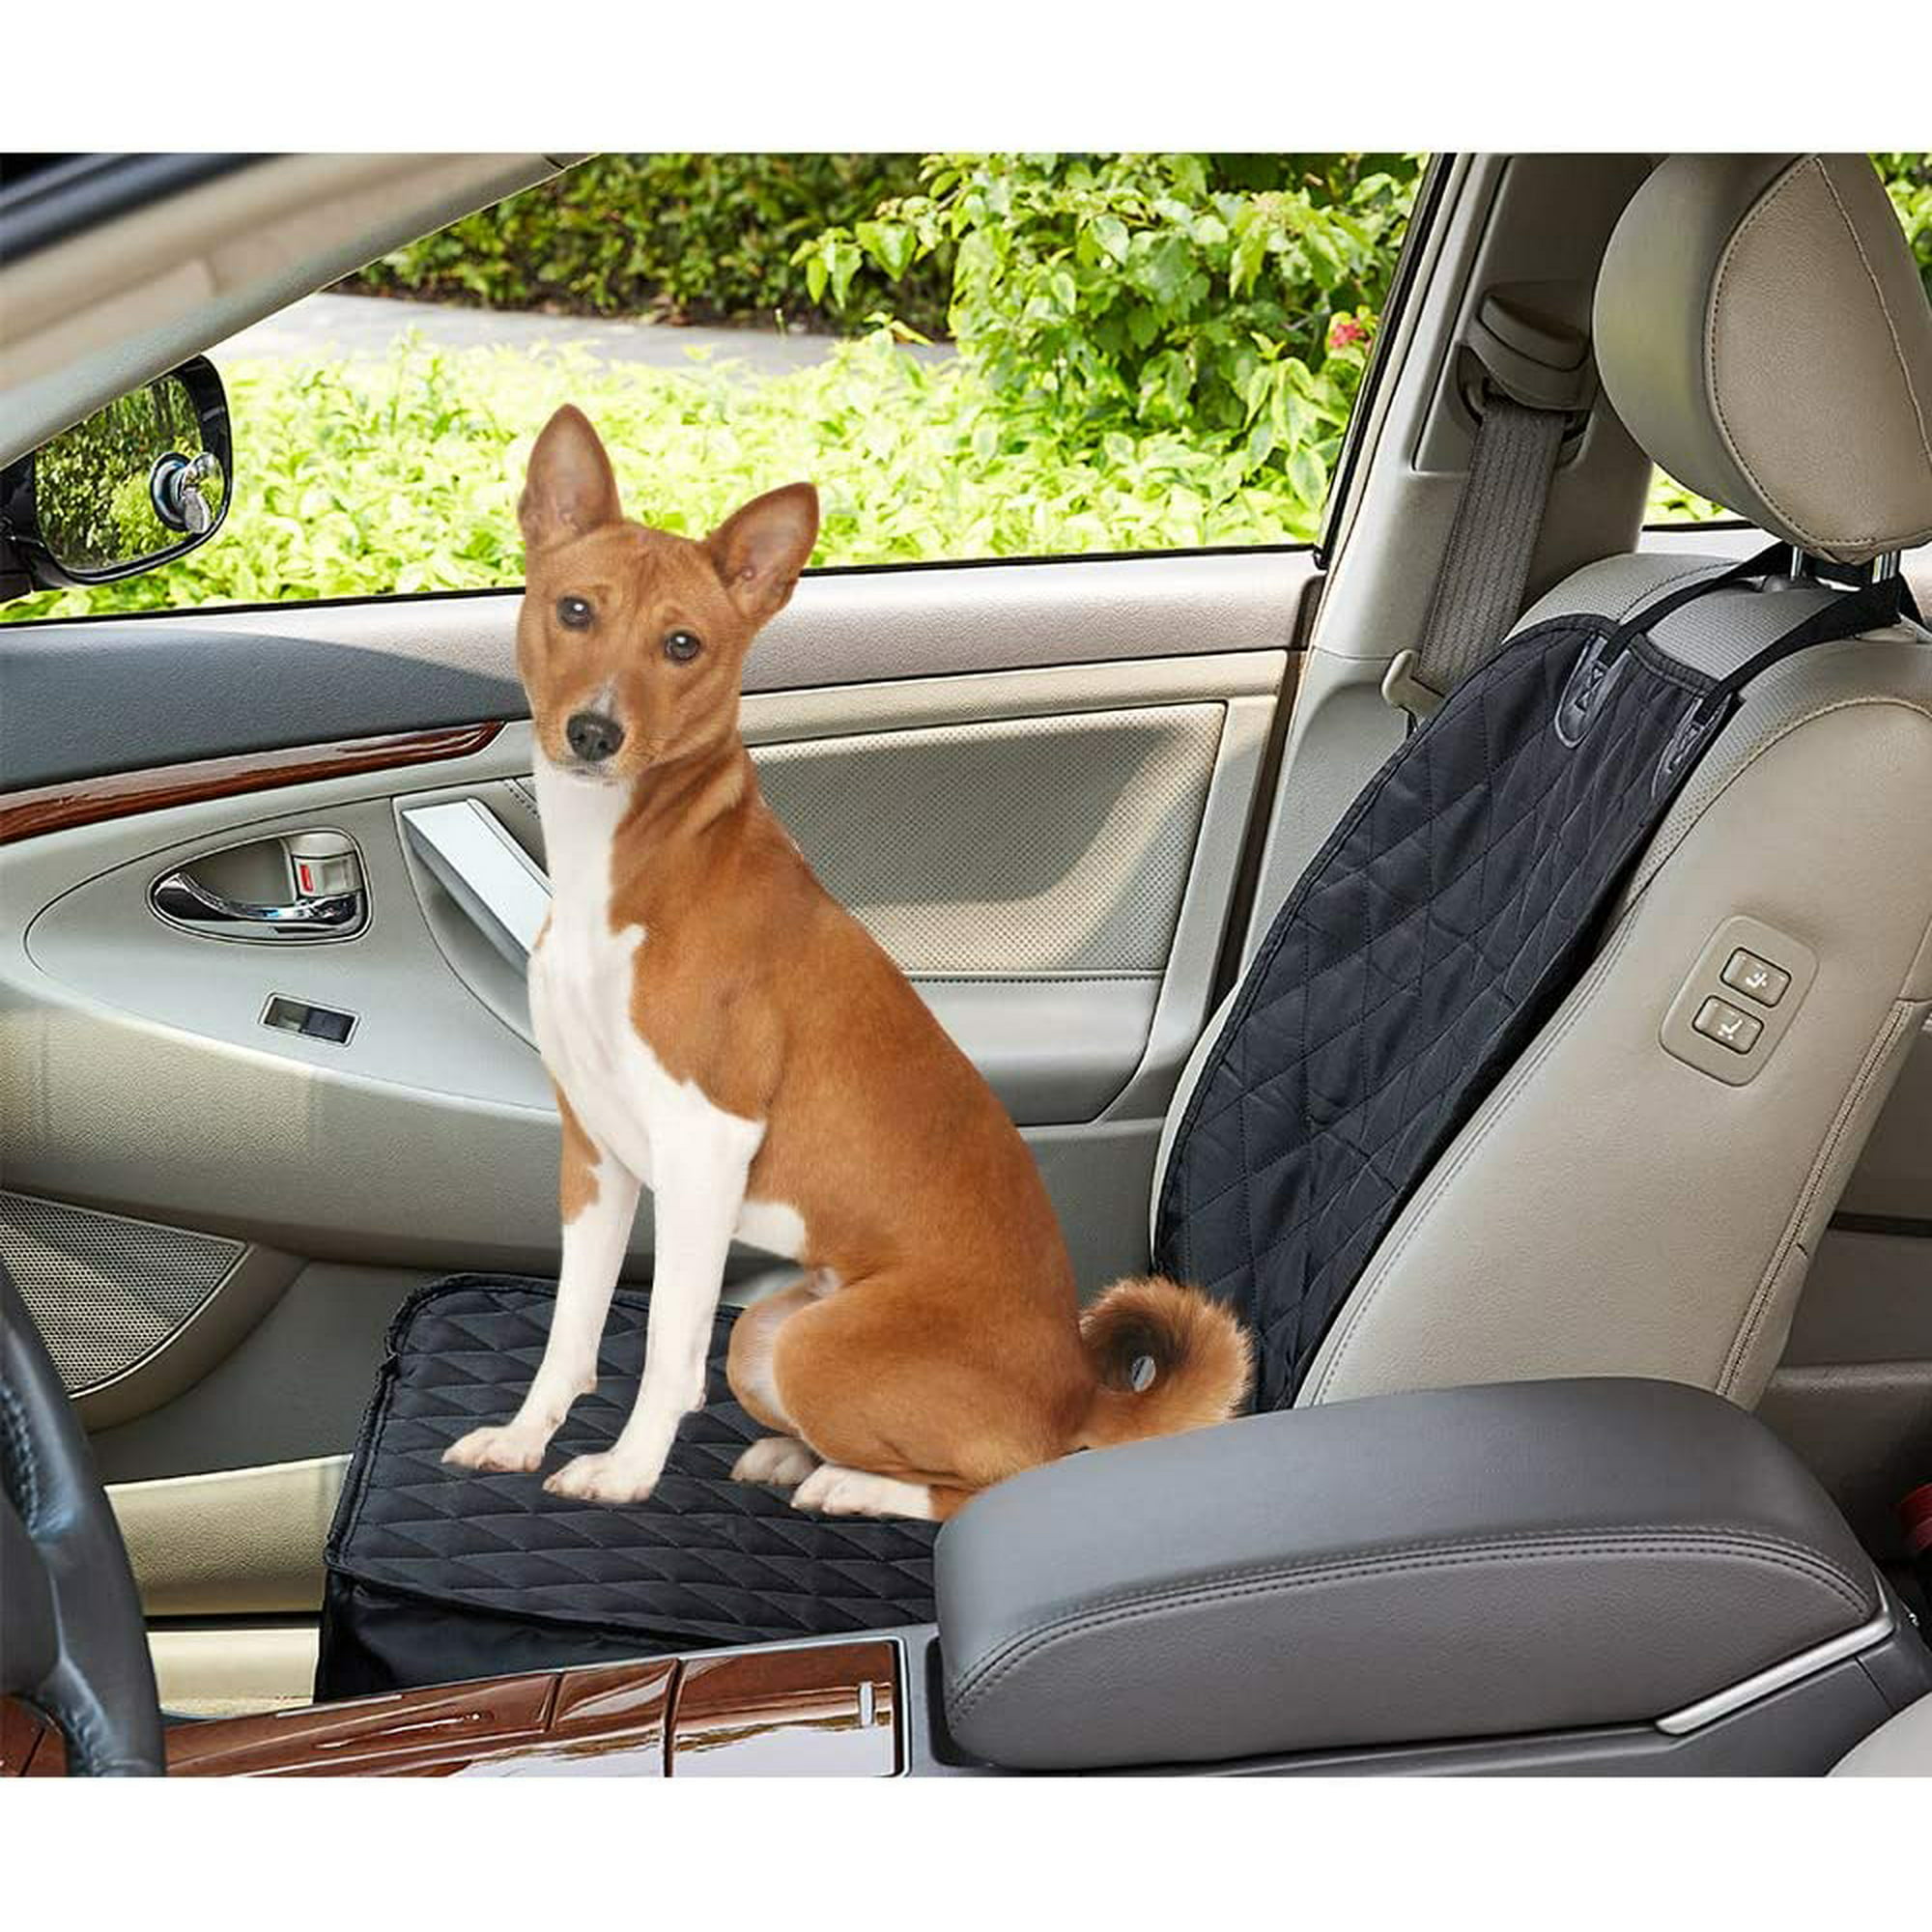 Car Seat Cover For Dogs Front Seats, Do Dogs Scratch Leather Car Seats